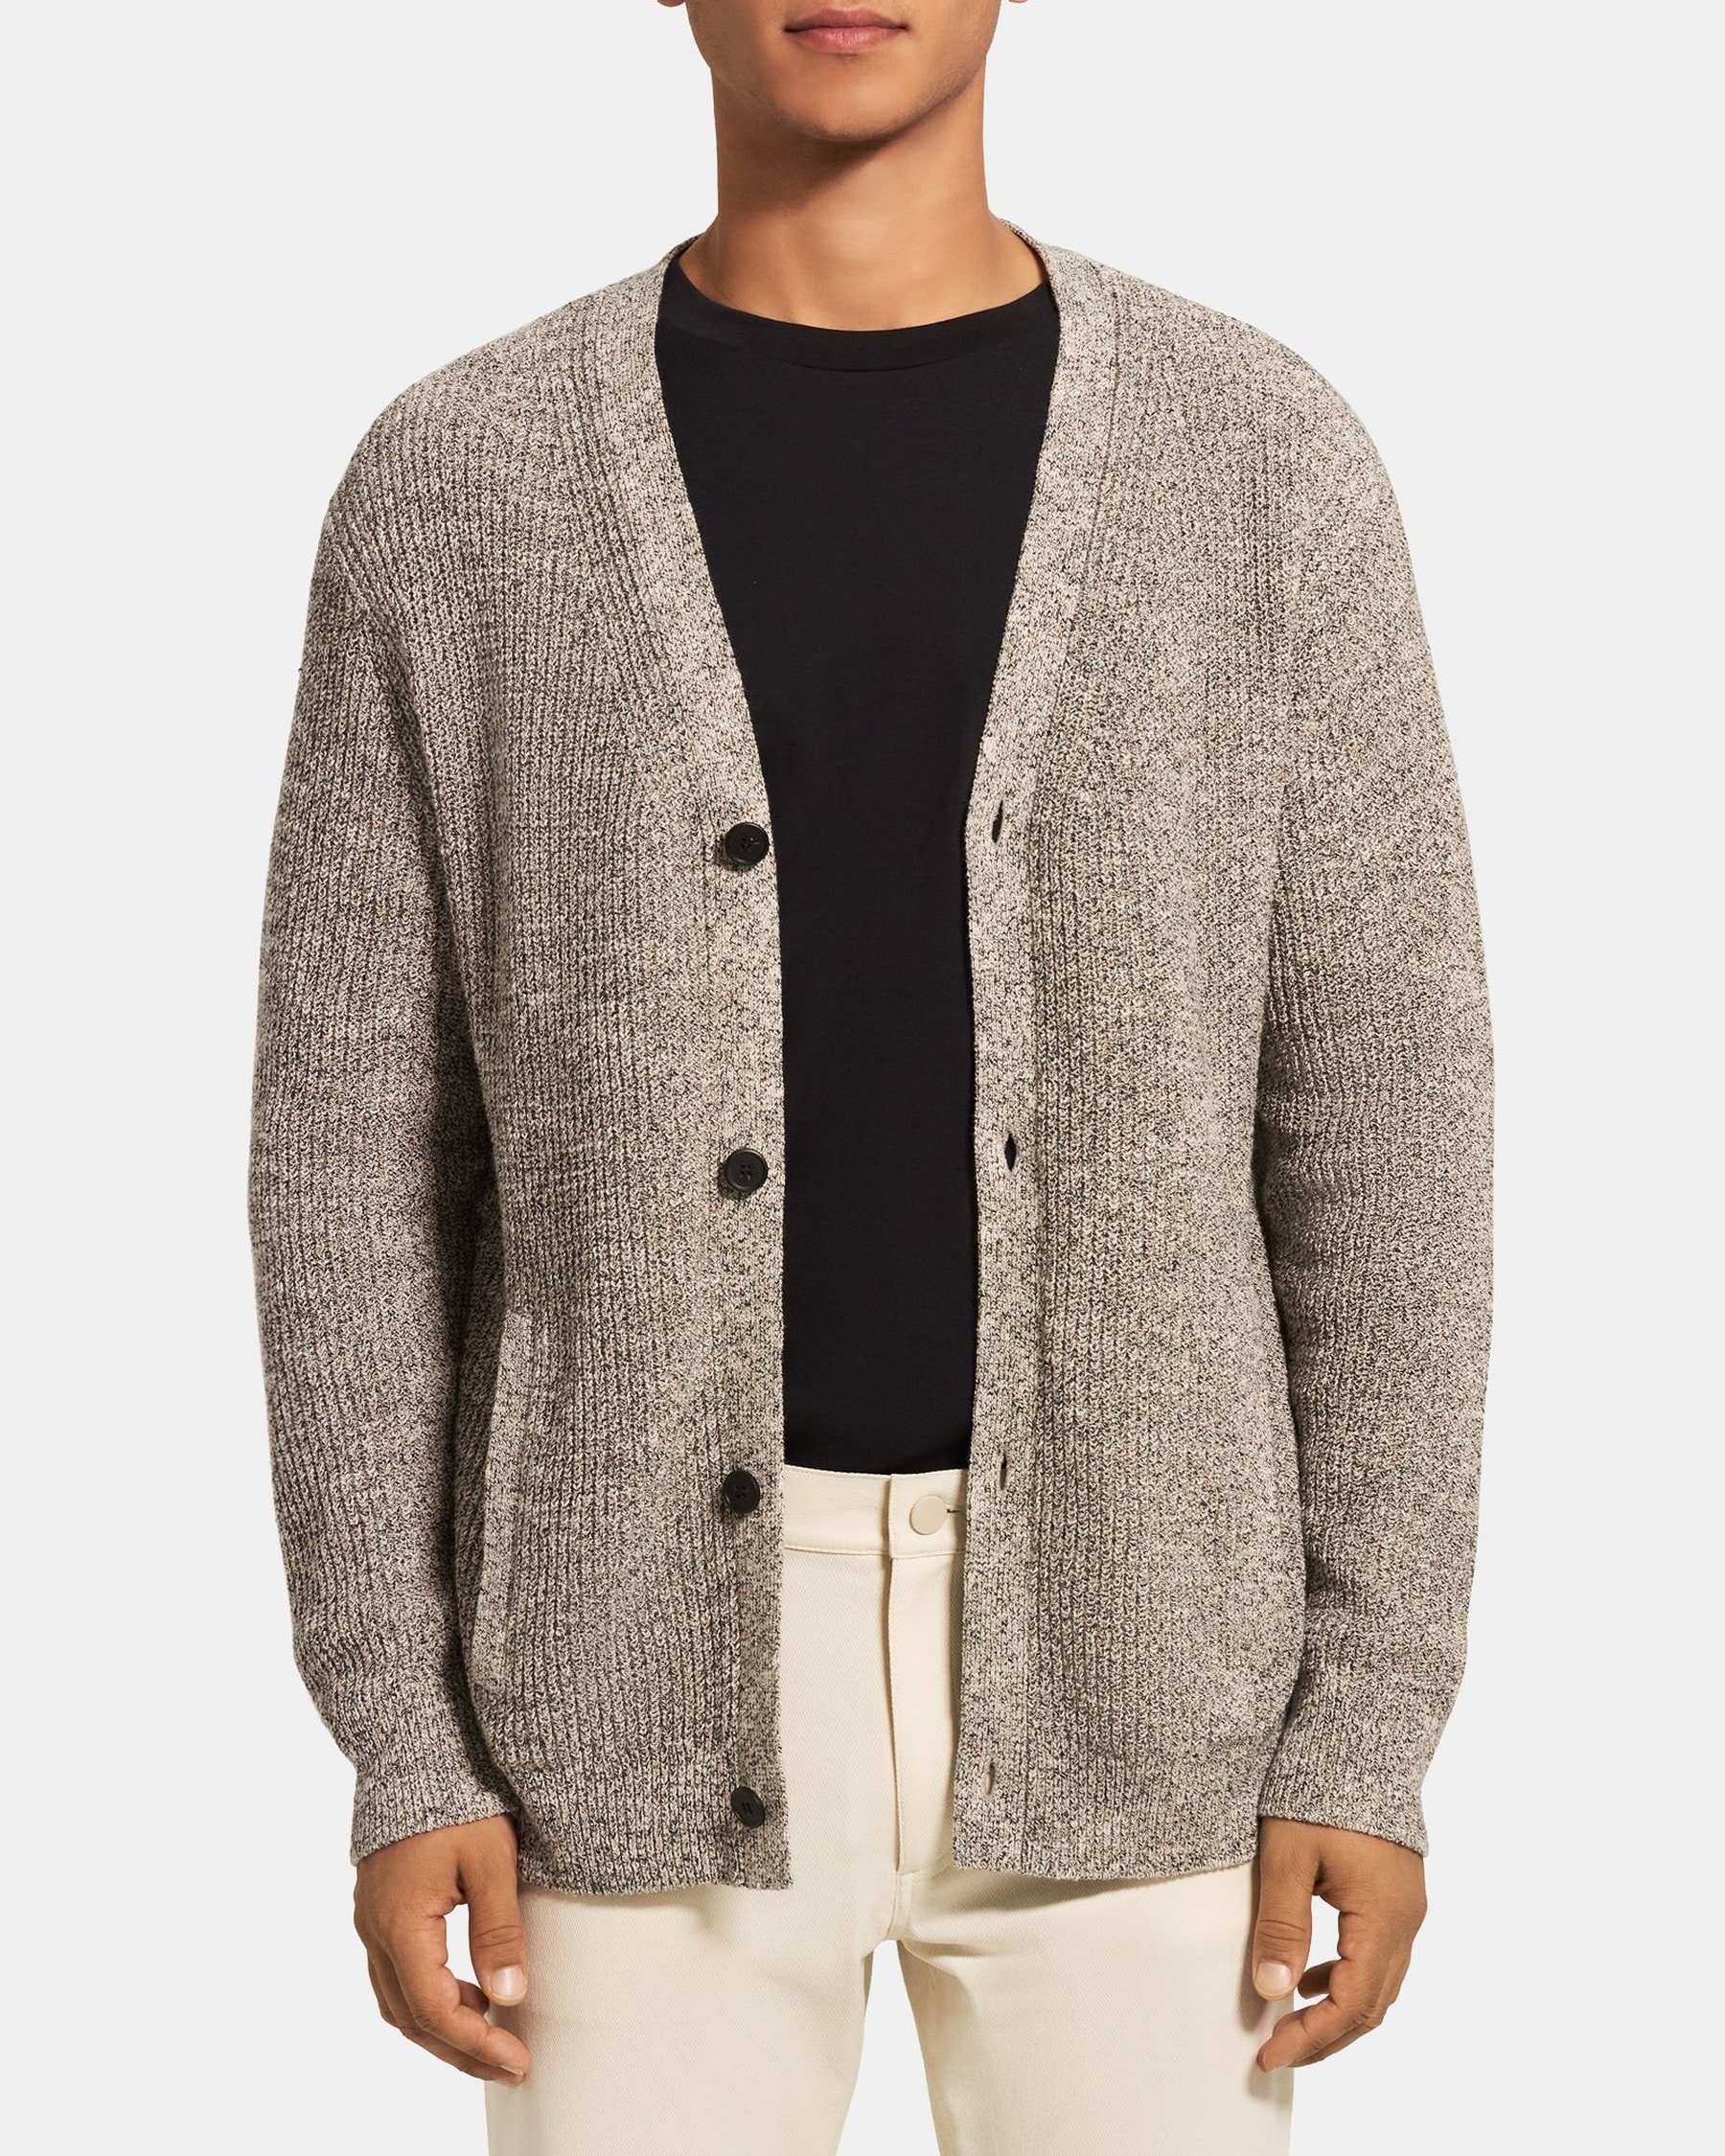 Cotton-Blend Tweed V-Neck Cardigan | Theory Outlet